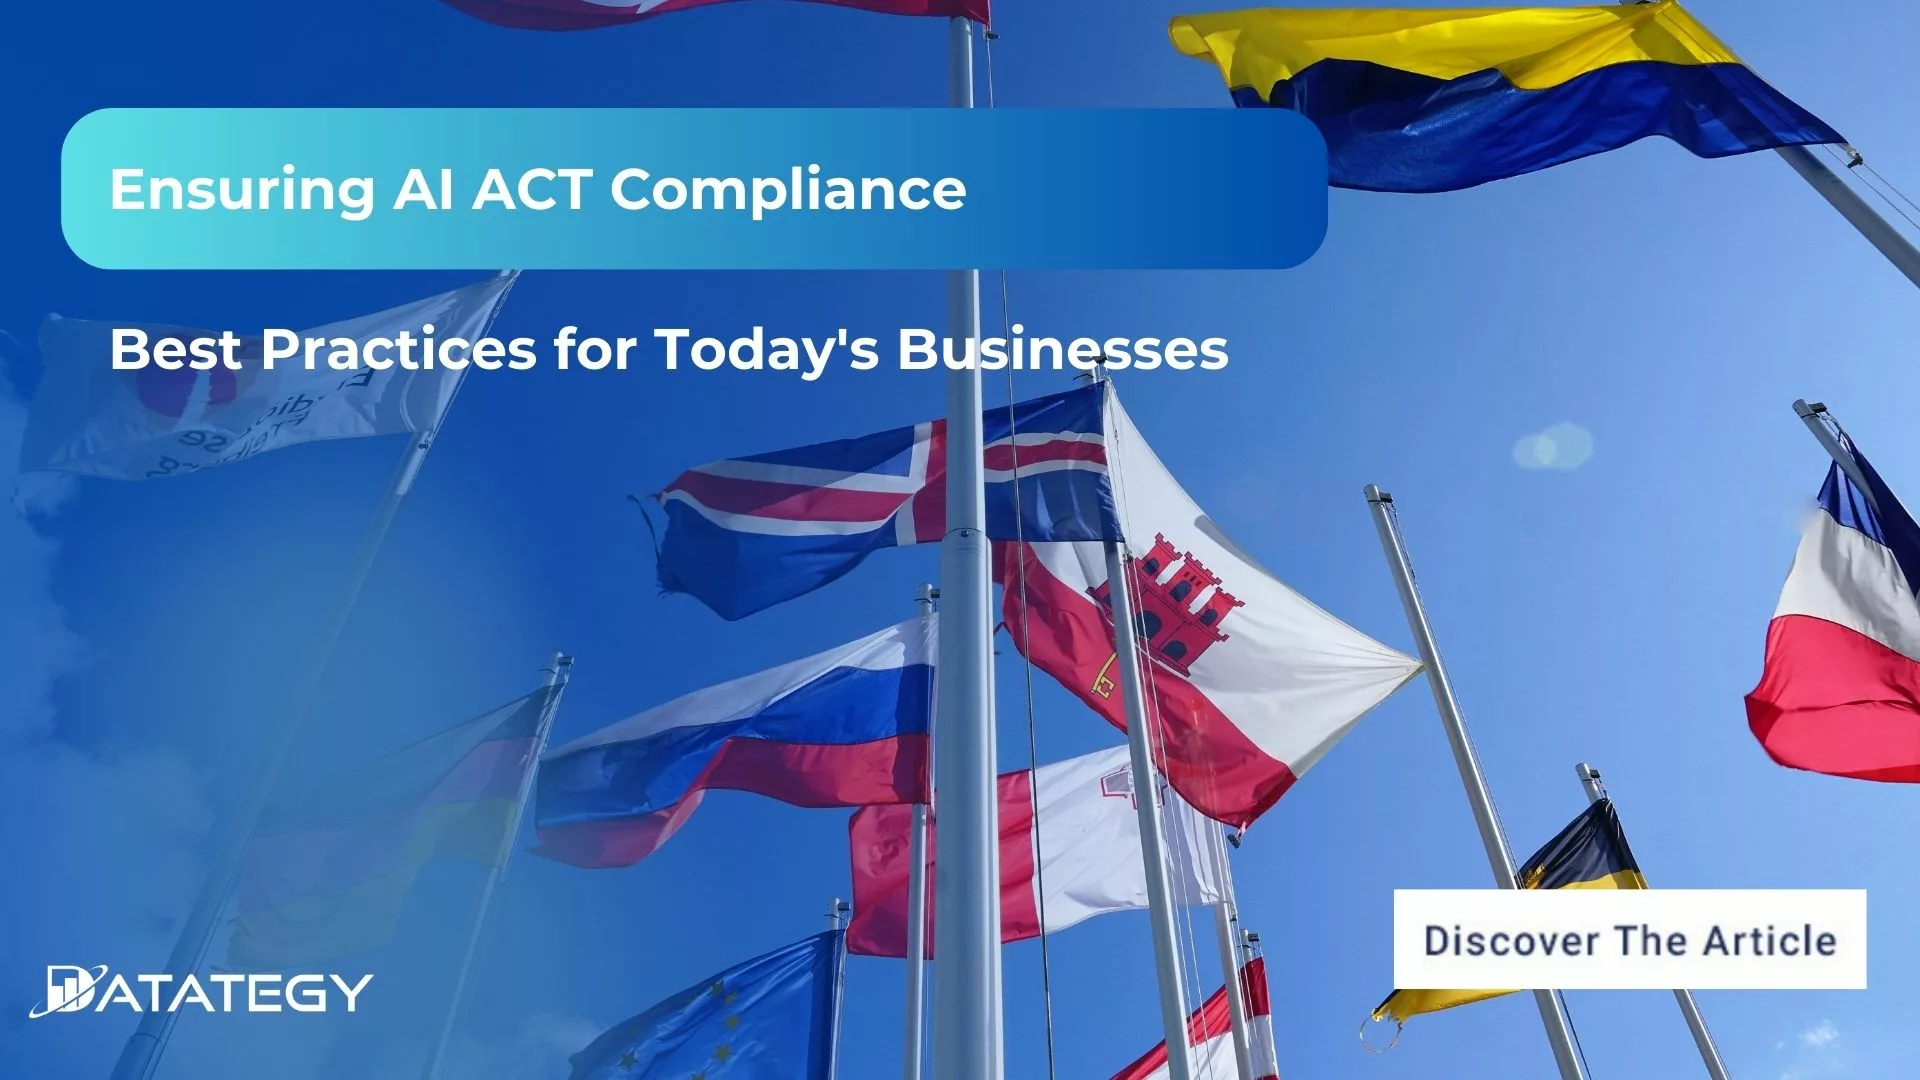 Ensuring AI ACT Compliance: Best Practices for Today's Businesses